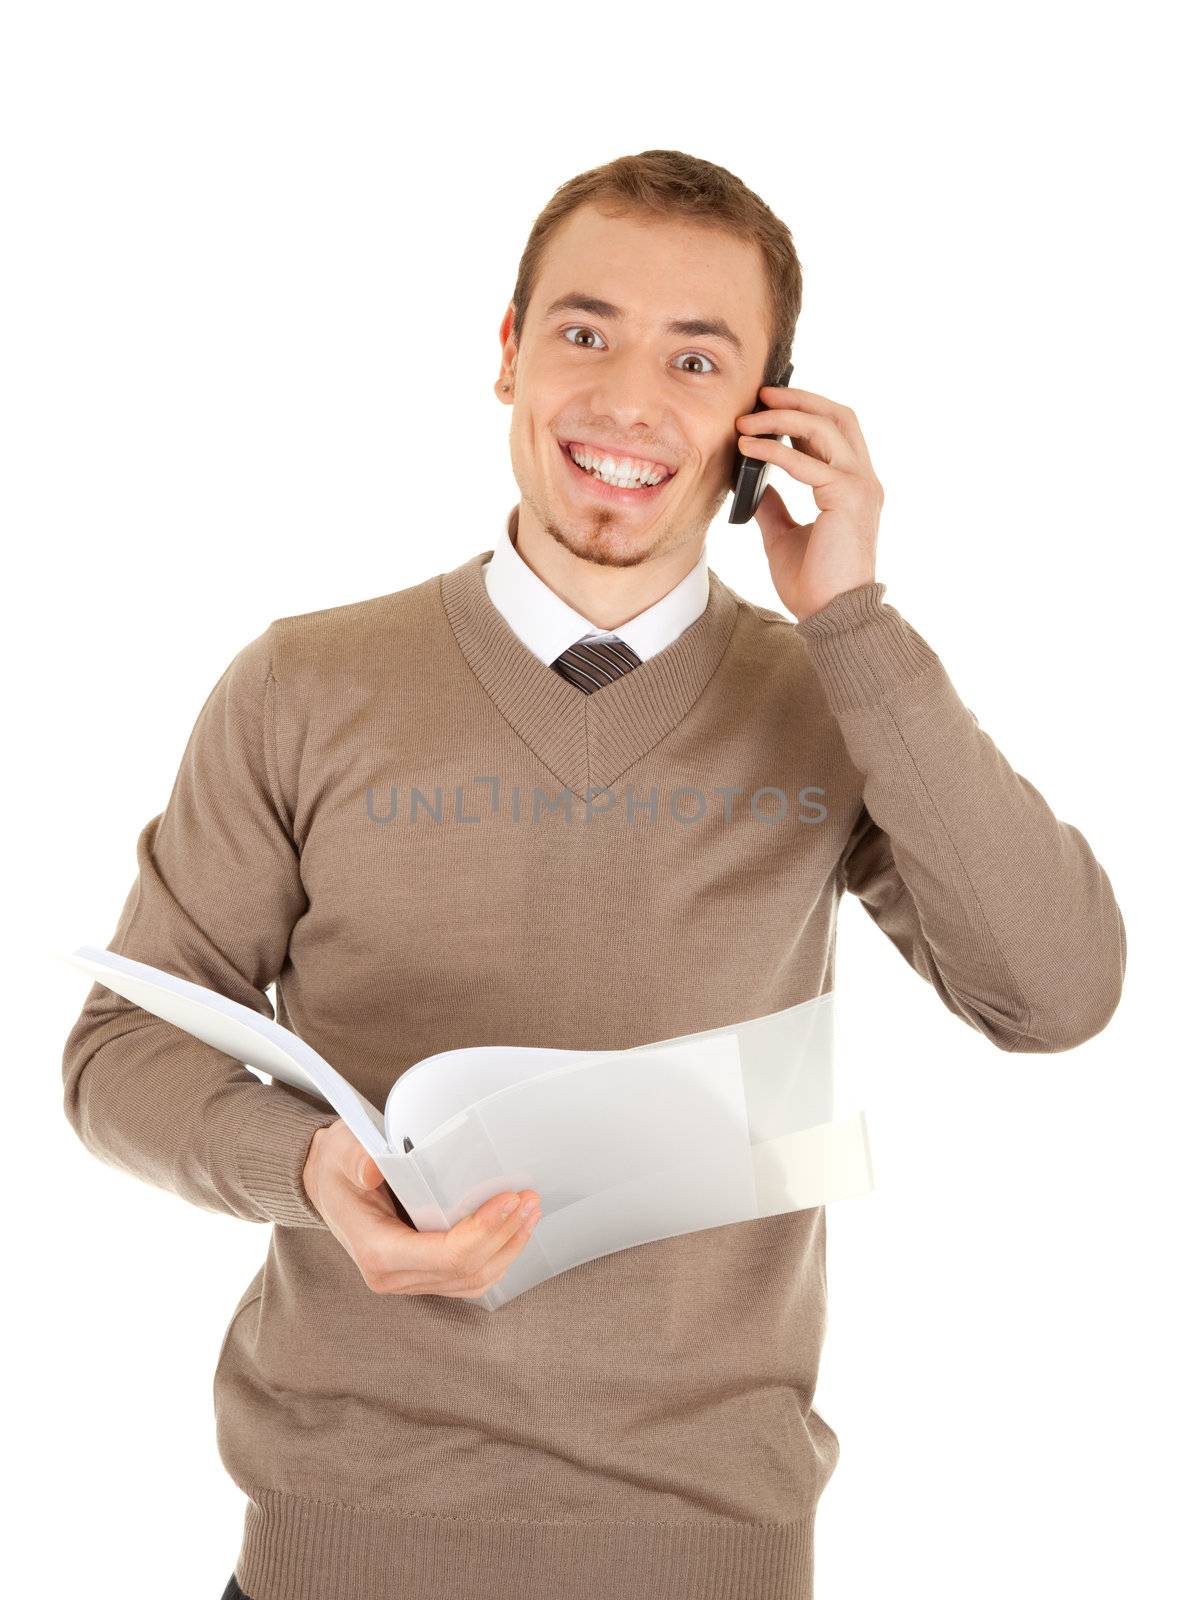 Man with paperwork in hands is completely happy with news by phone. Isolated on white background.